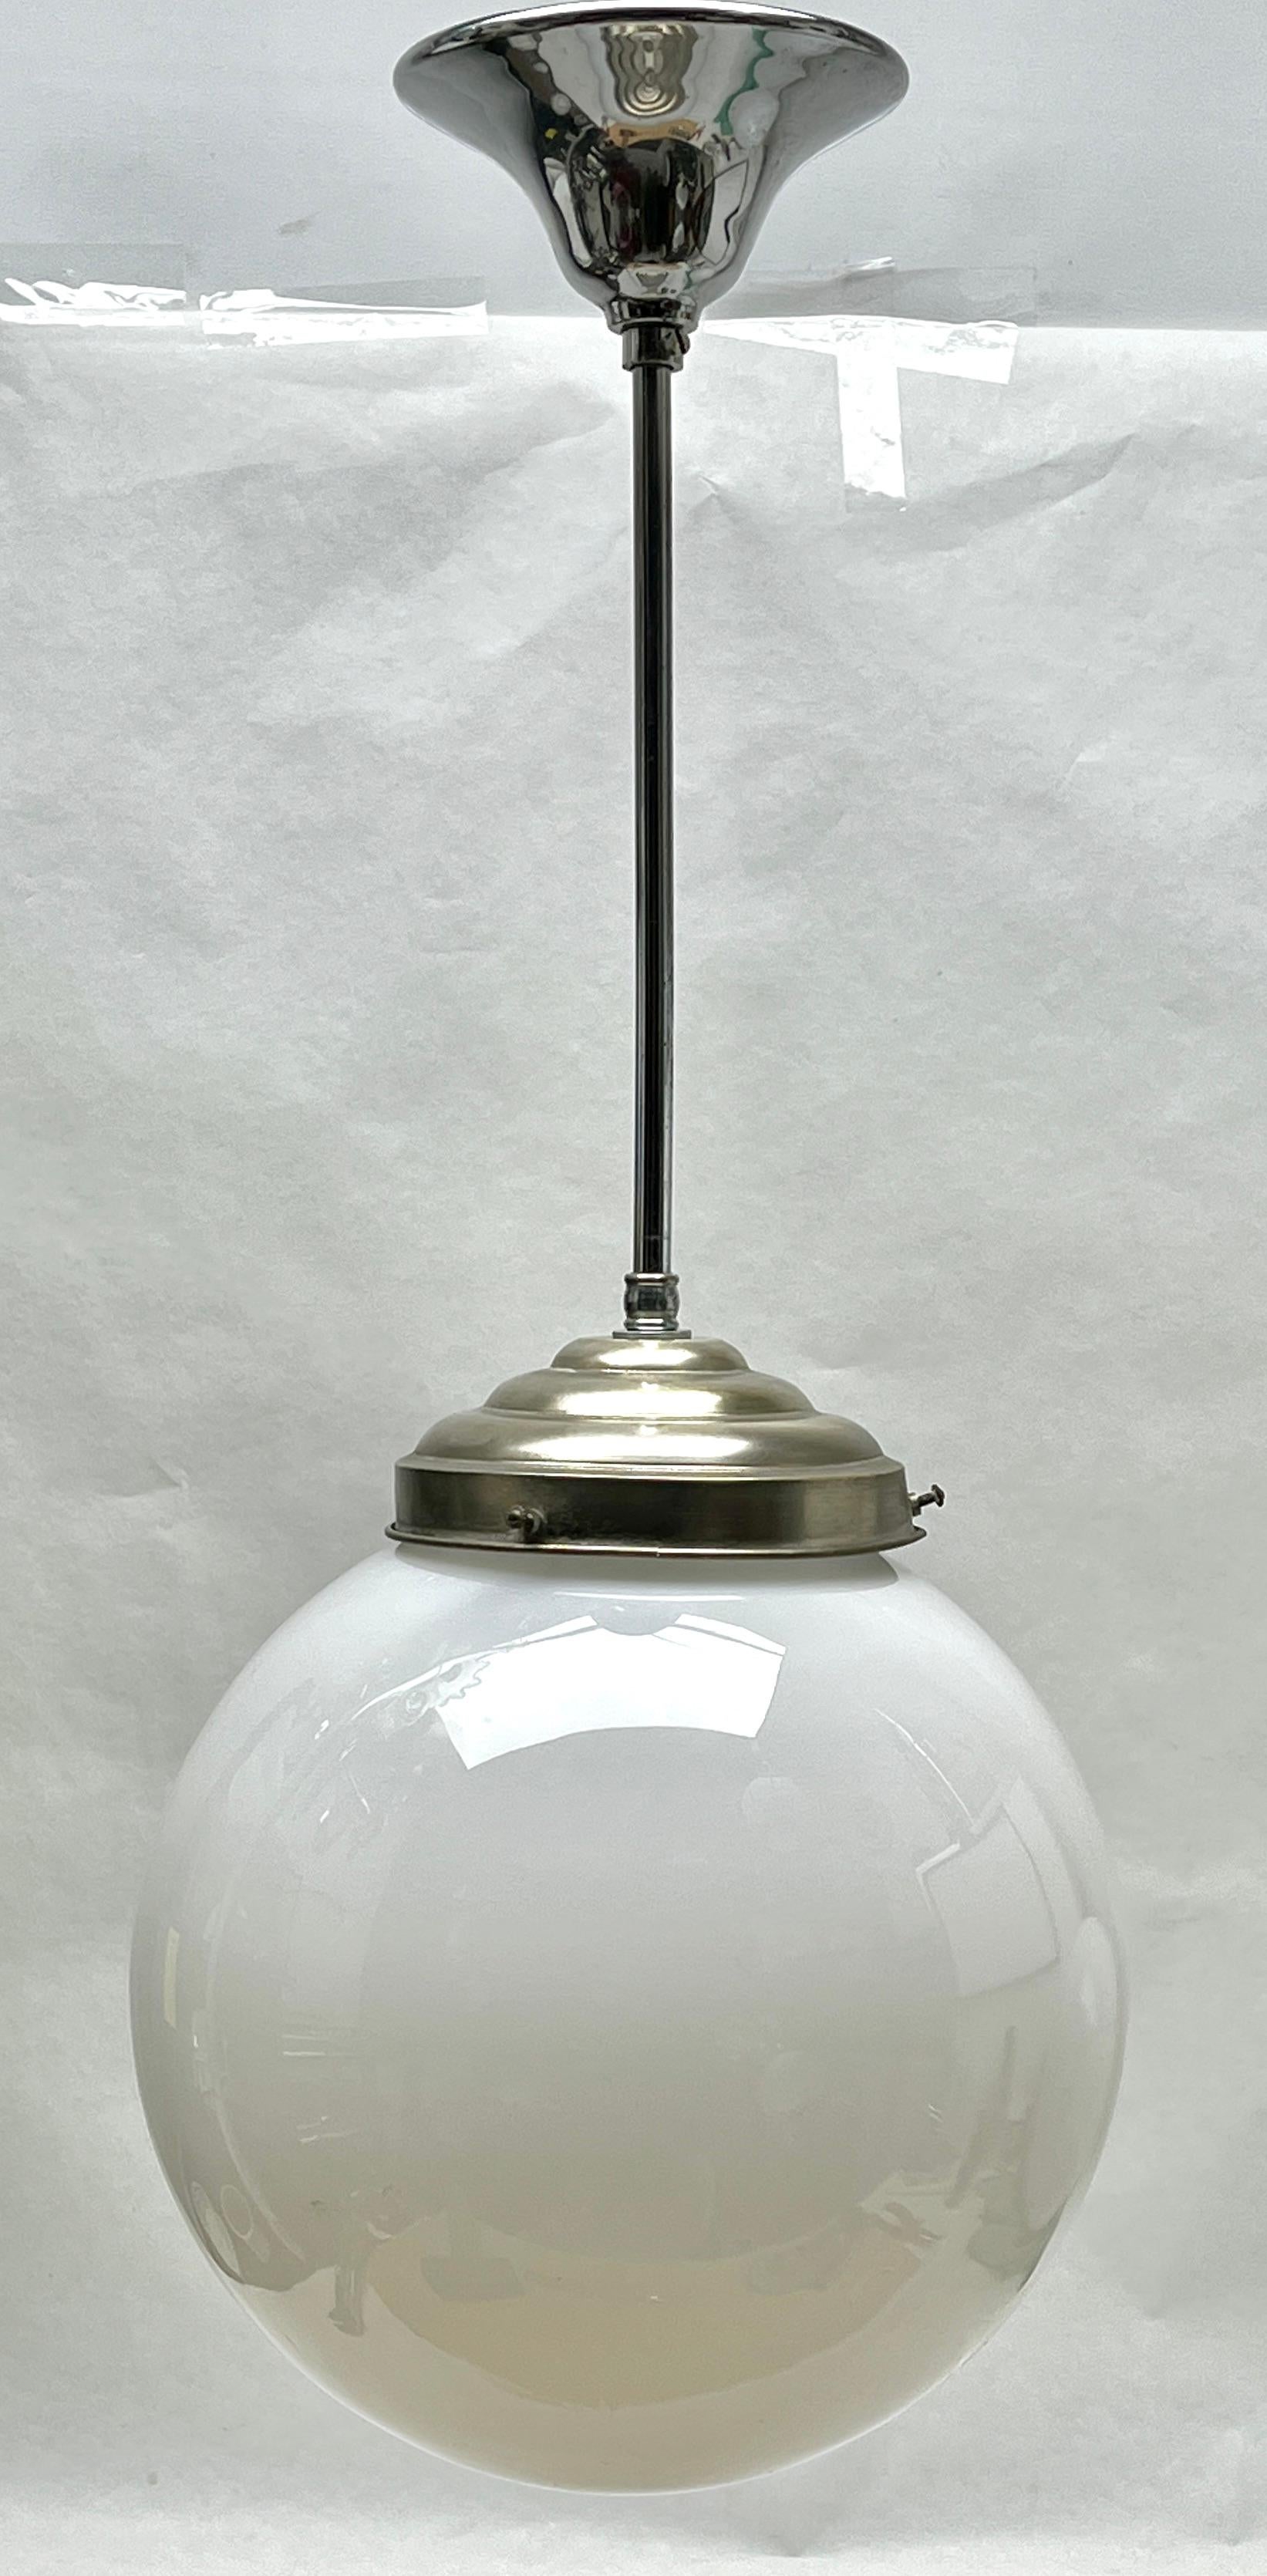 Phillips Pendant Stem Lamp with a Globular Opaline Shade, 1930s, Netherlands For Sale 5